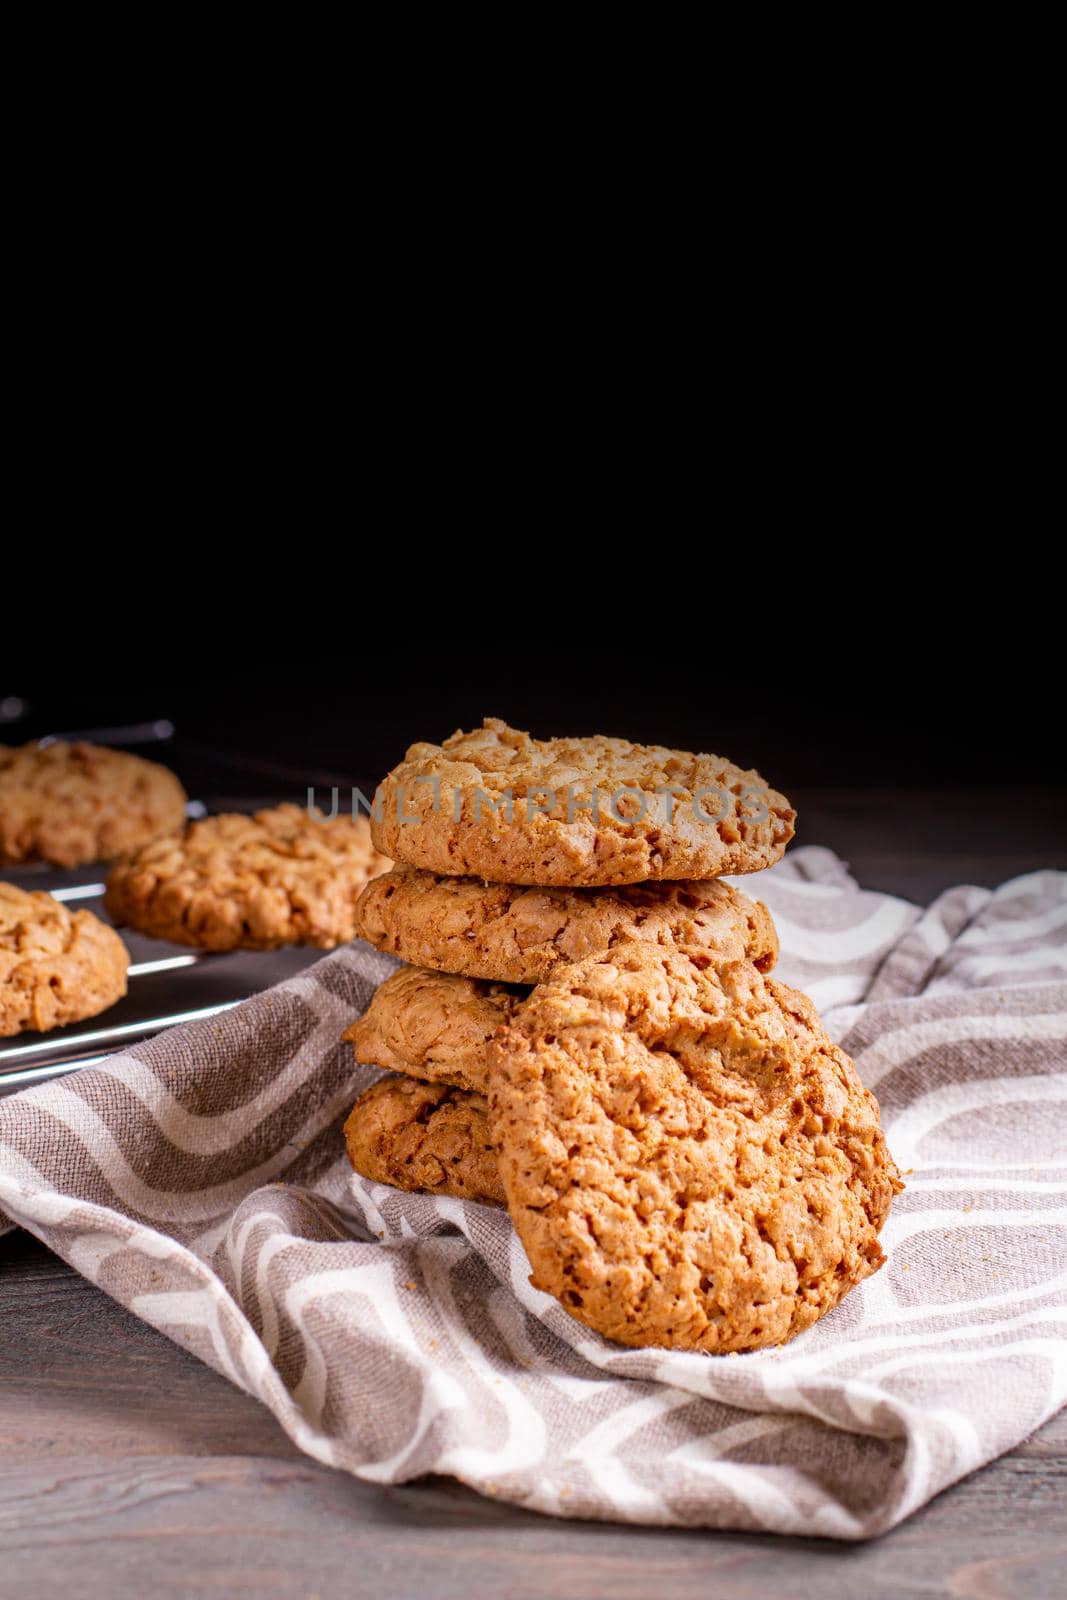 A stack of oatmeal cookies in a saucer and a napkin on a wooden table on a dark background.